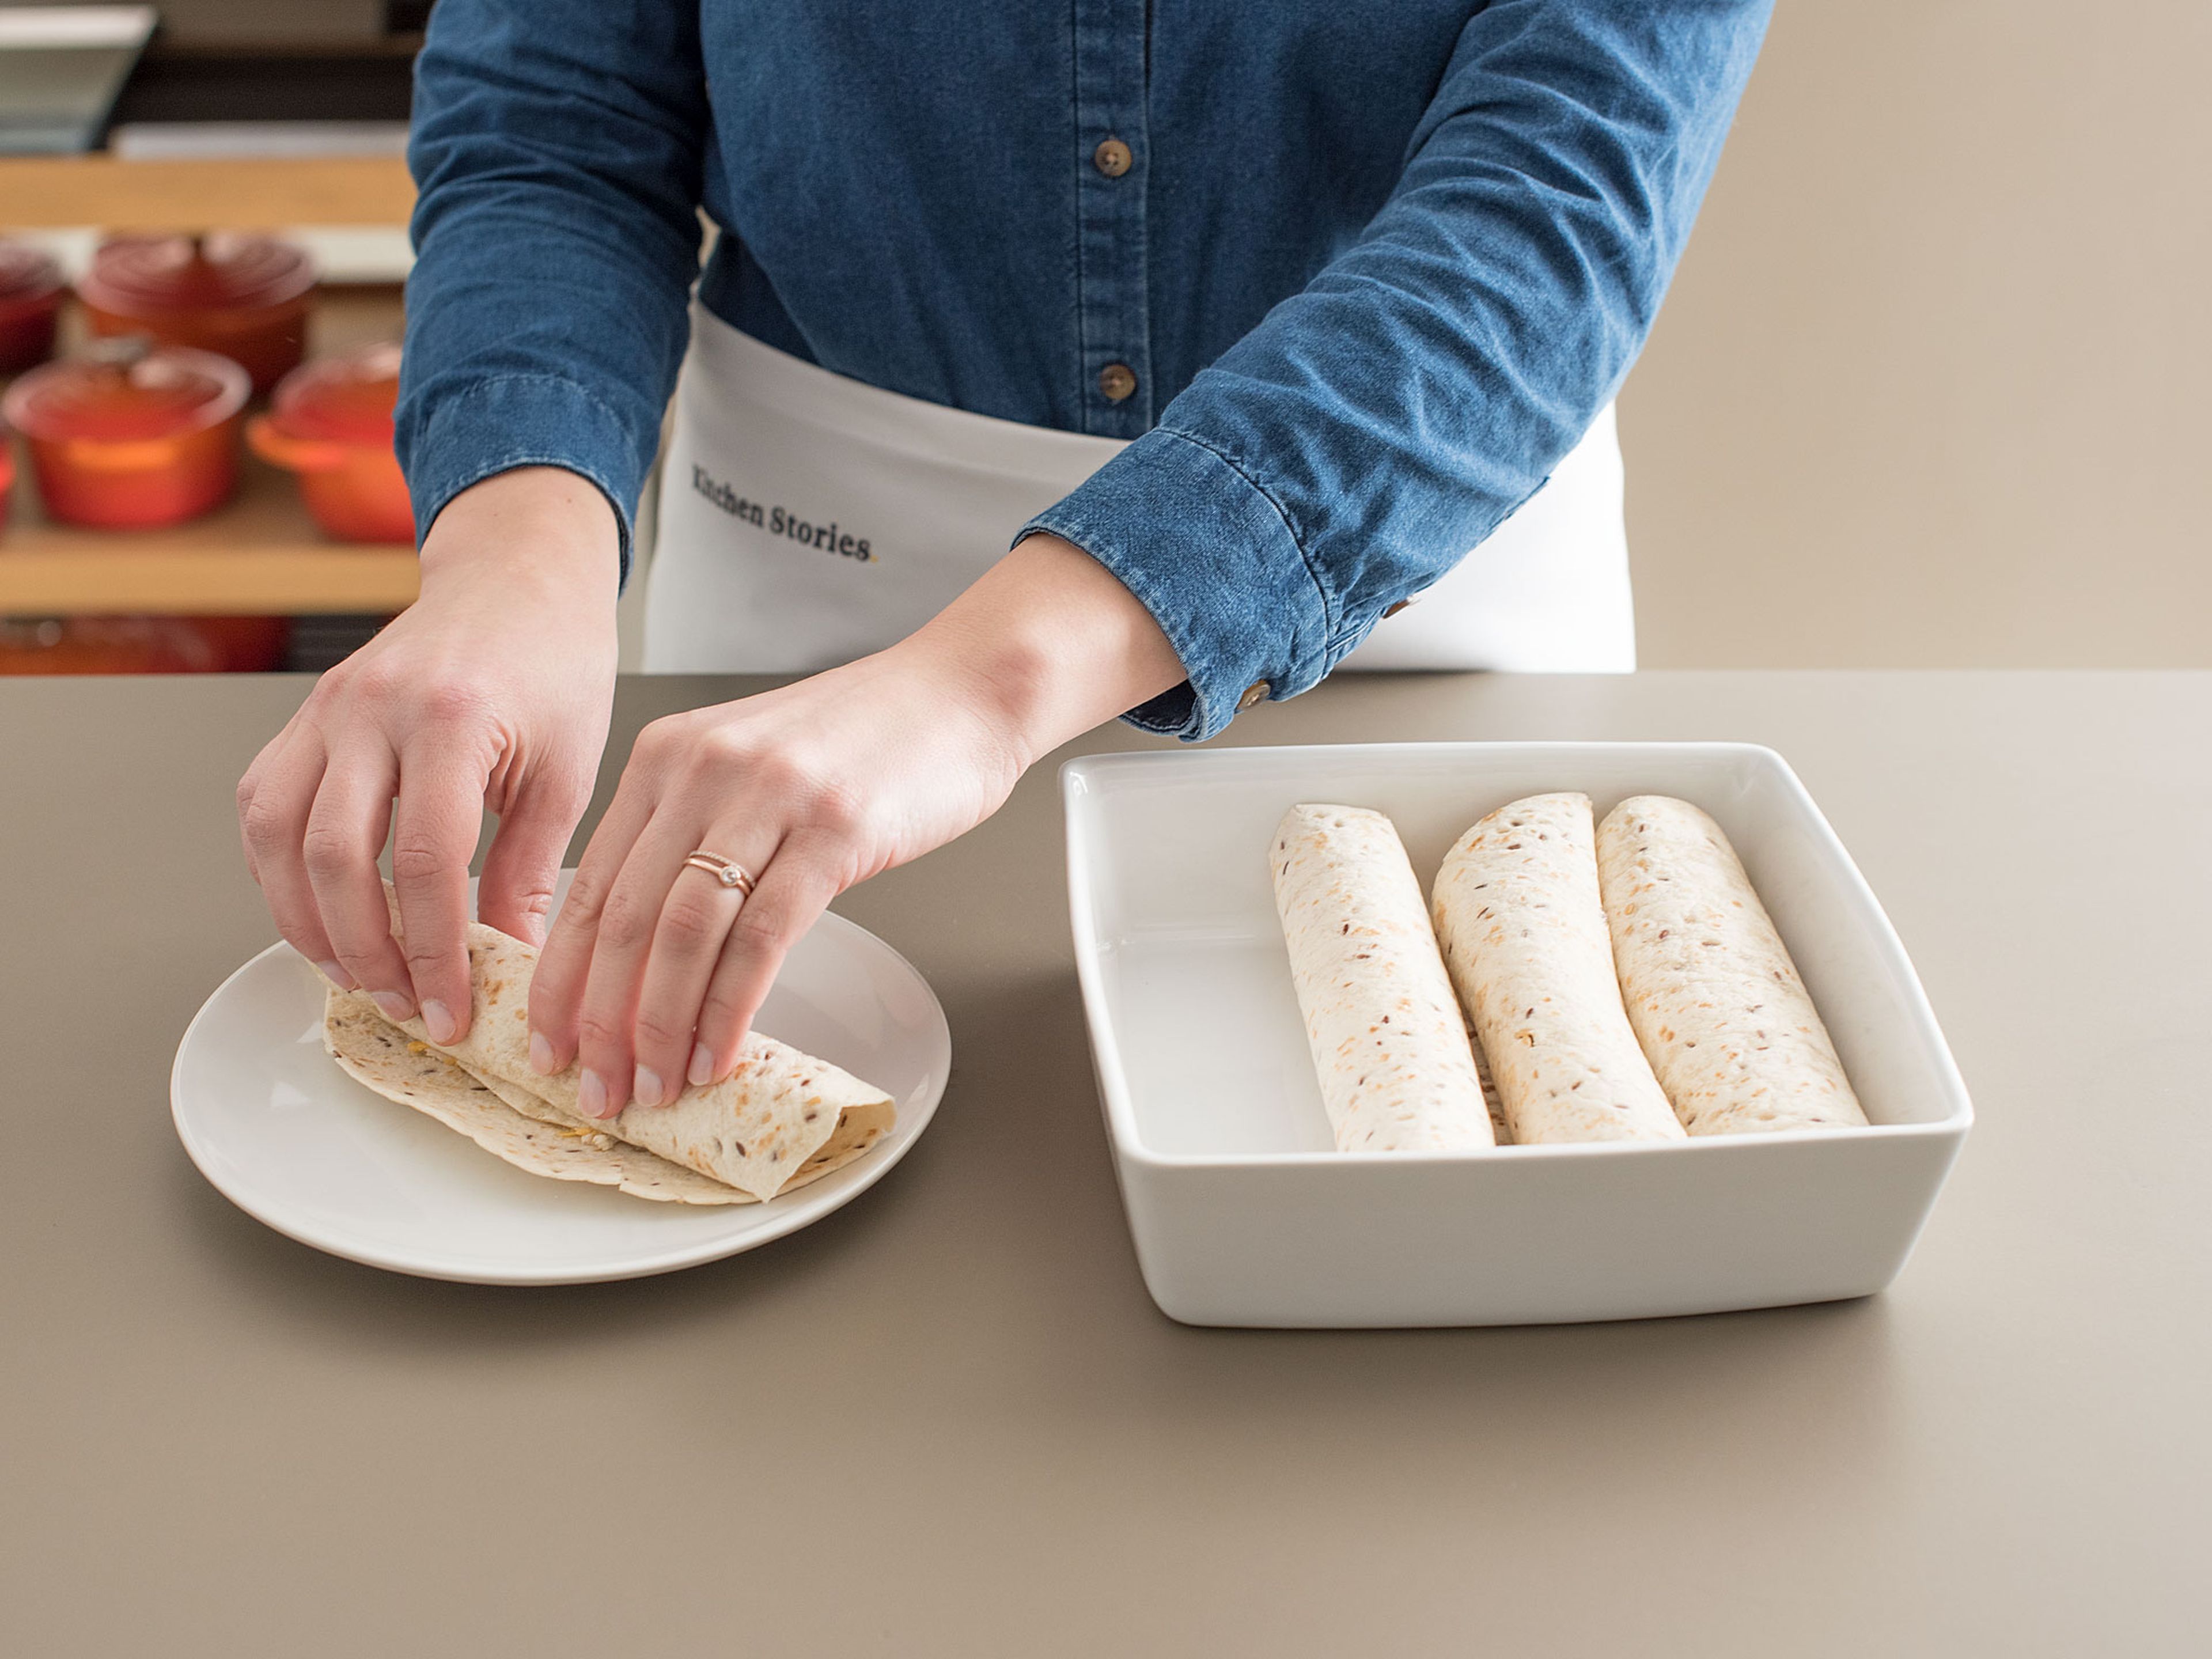 Roll up the tortillas and place seam-side-down in baking dish.